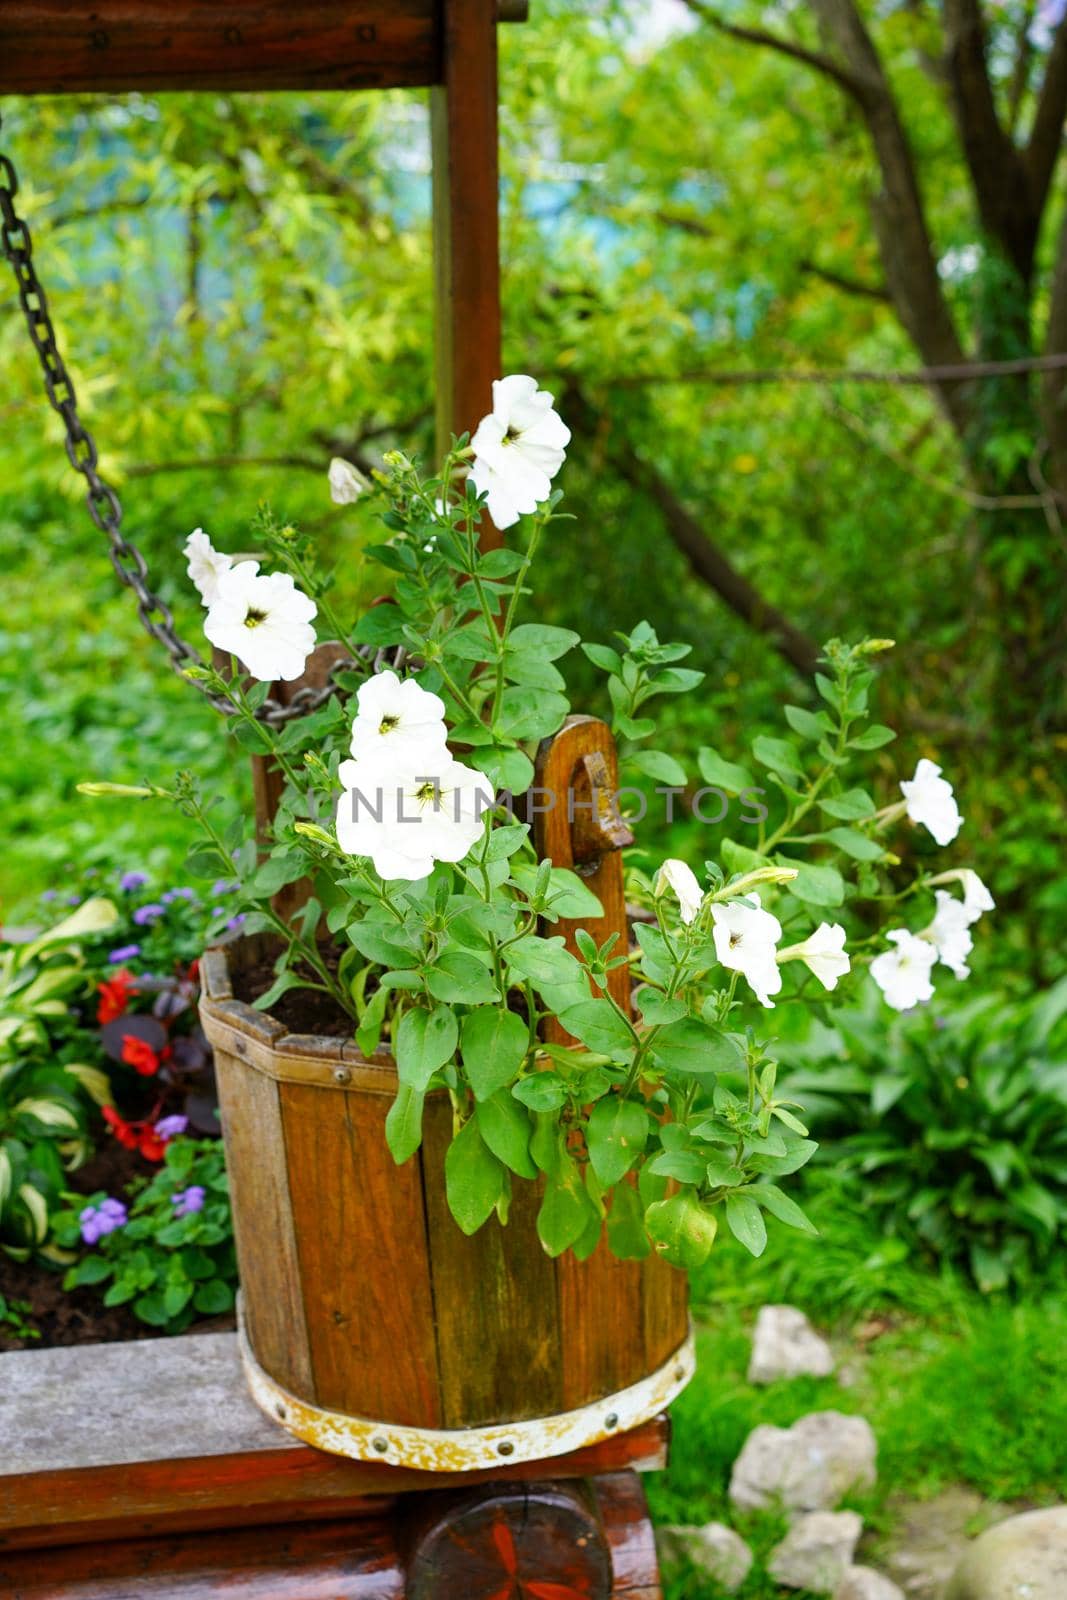 Rural landscape with flowers in a wooden bucket.